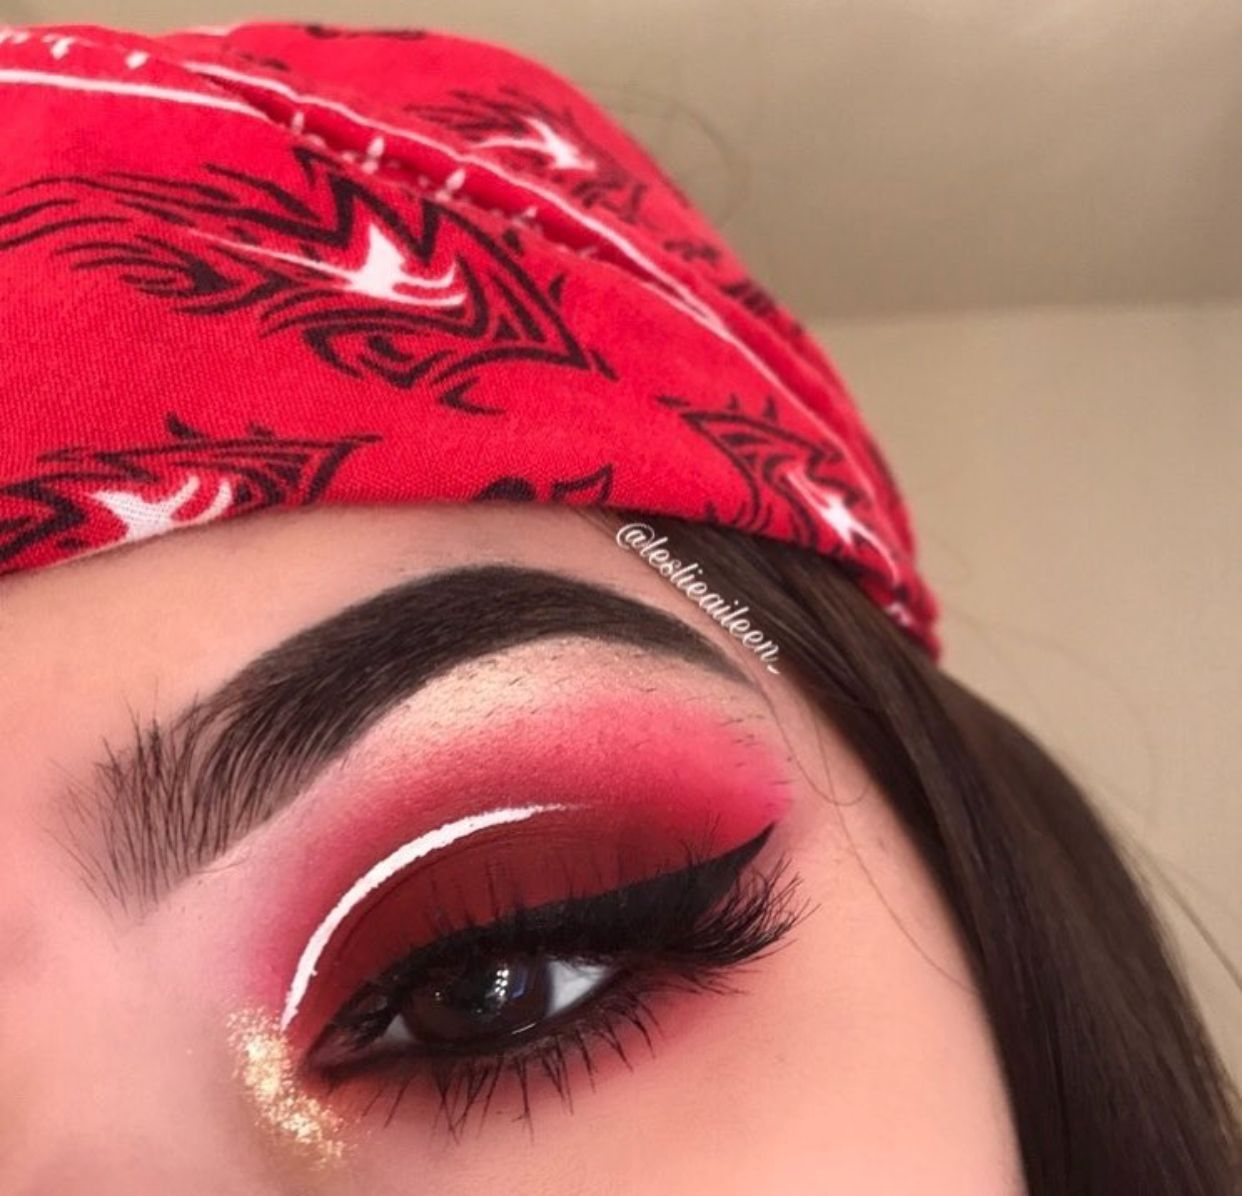 Red Eye Makeup Deep Cranberry Shadows Love This Red Eye Makeup With A White Stripe